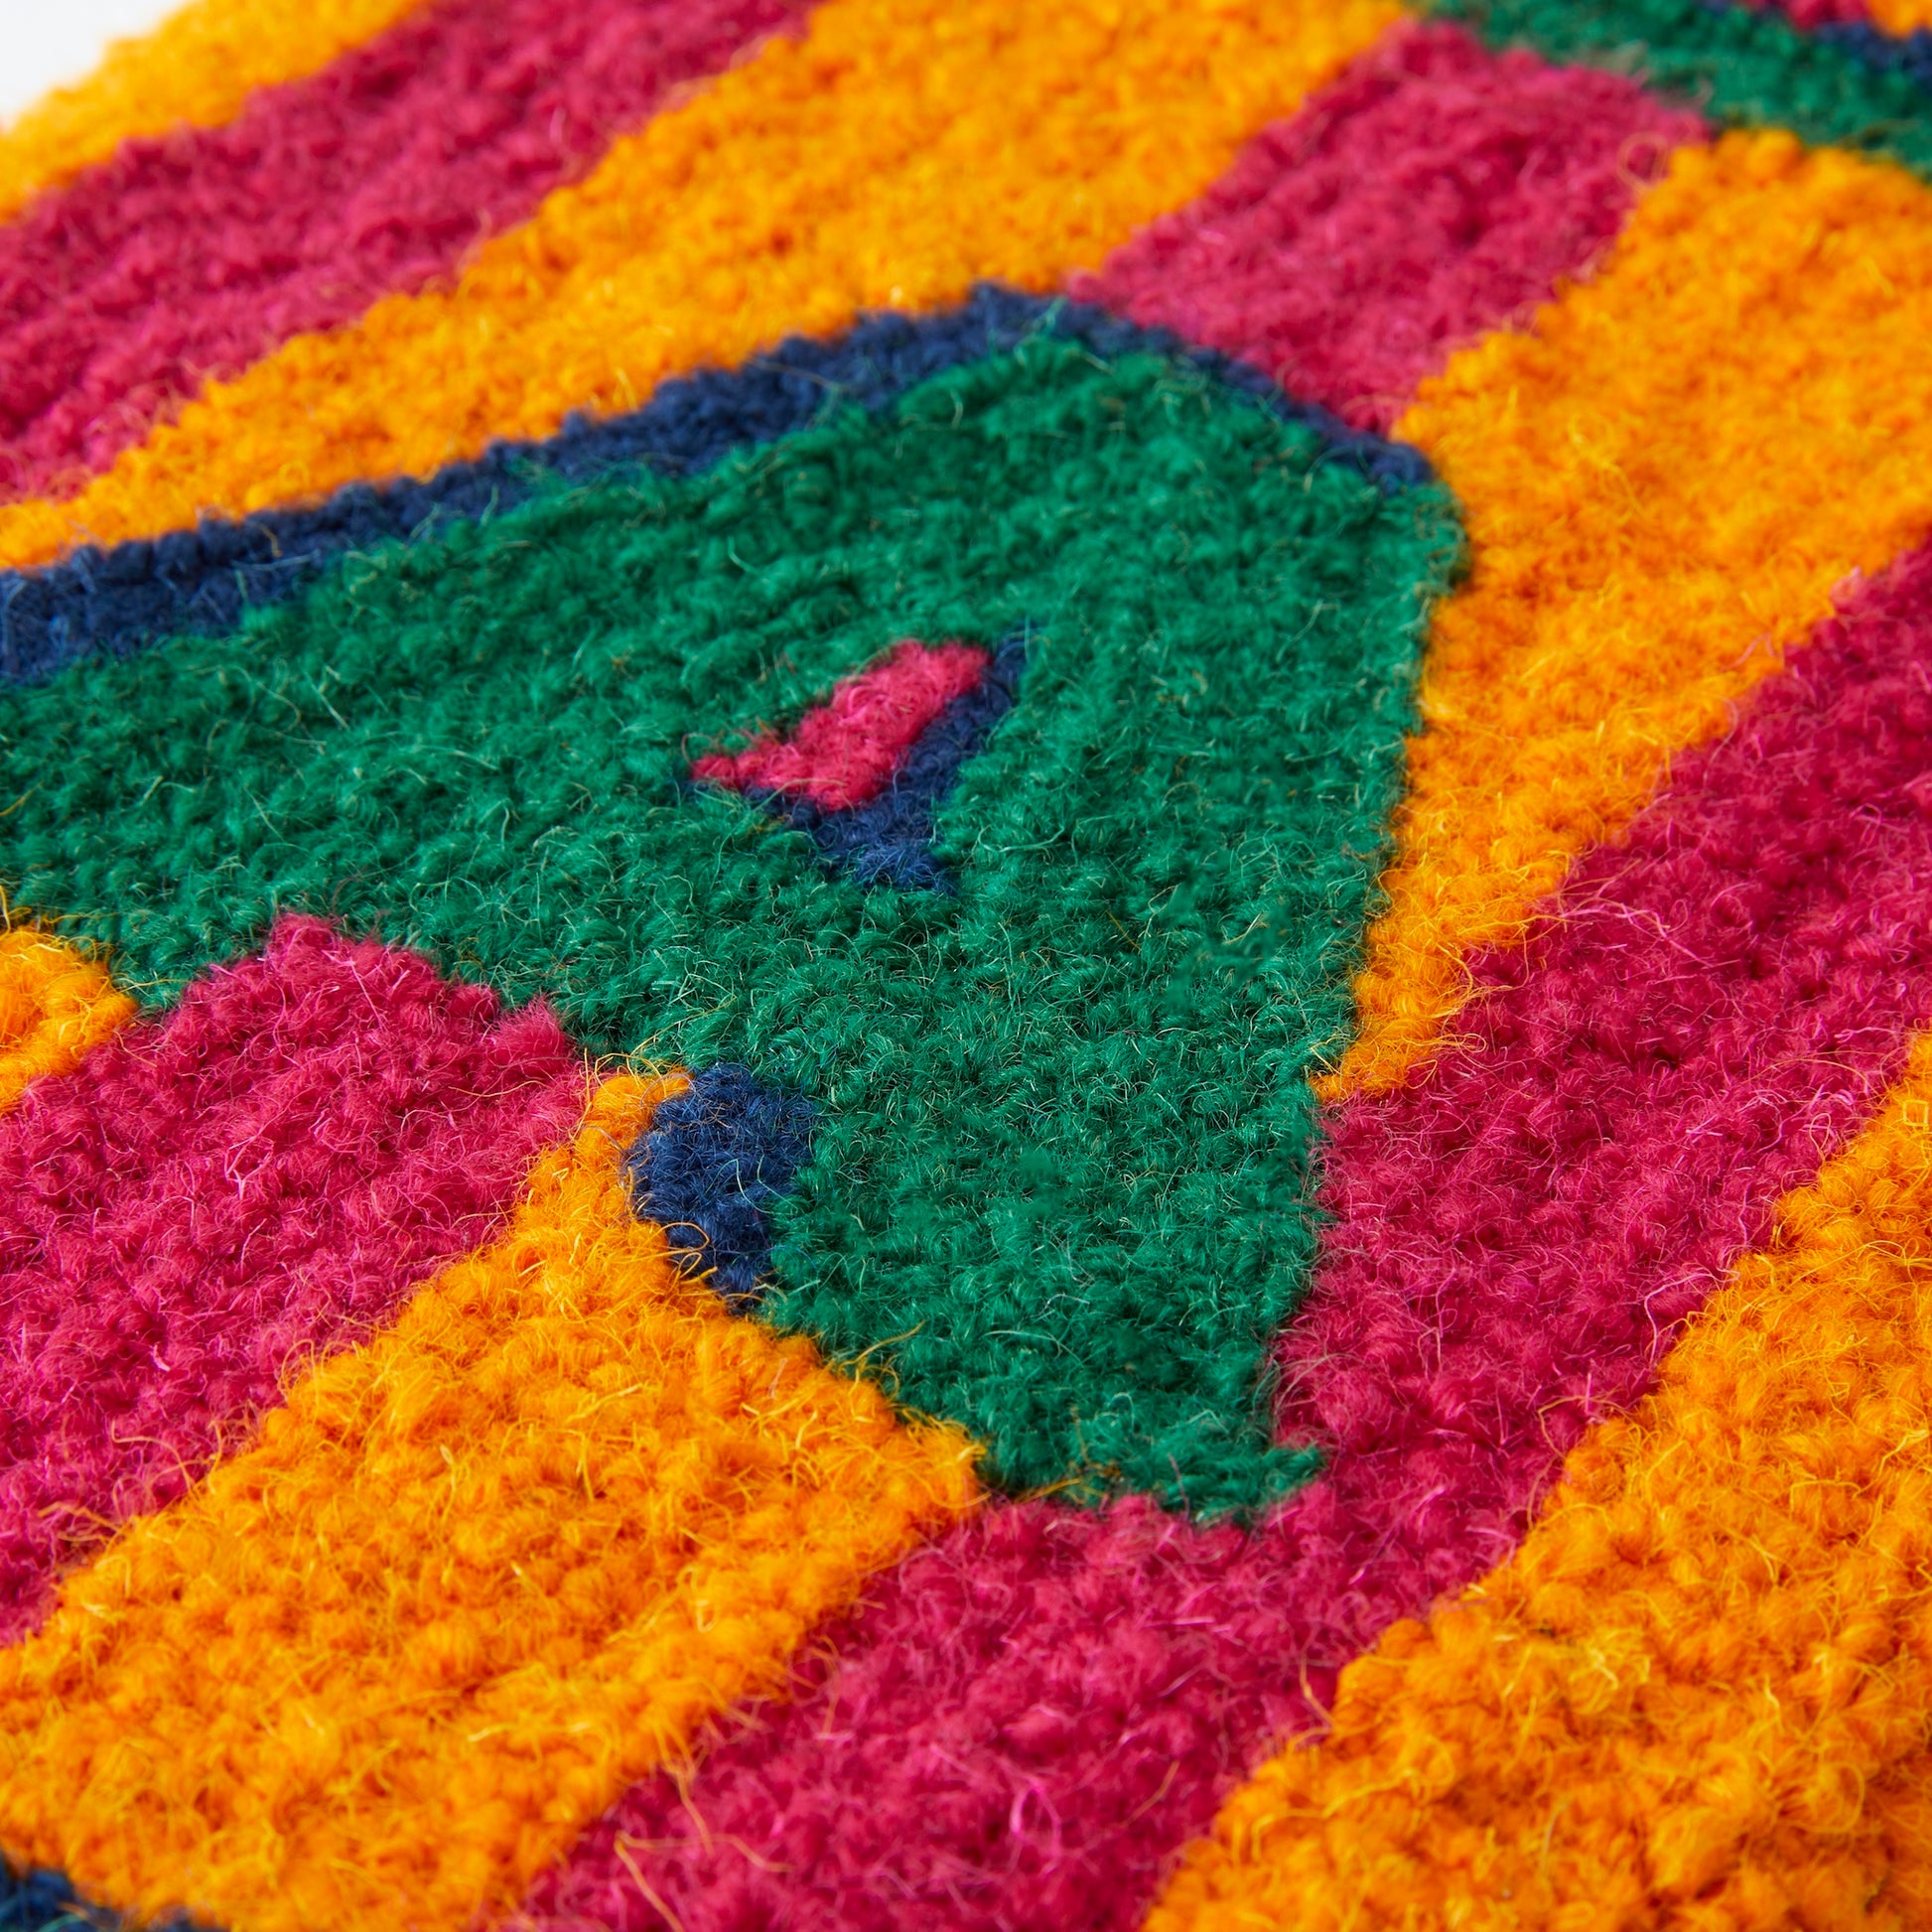 DREAM in a bold shadow text, Green and Navy shadows with a Magenta and Orange striped background in a loop pile using reclaimed yarn close up. 